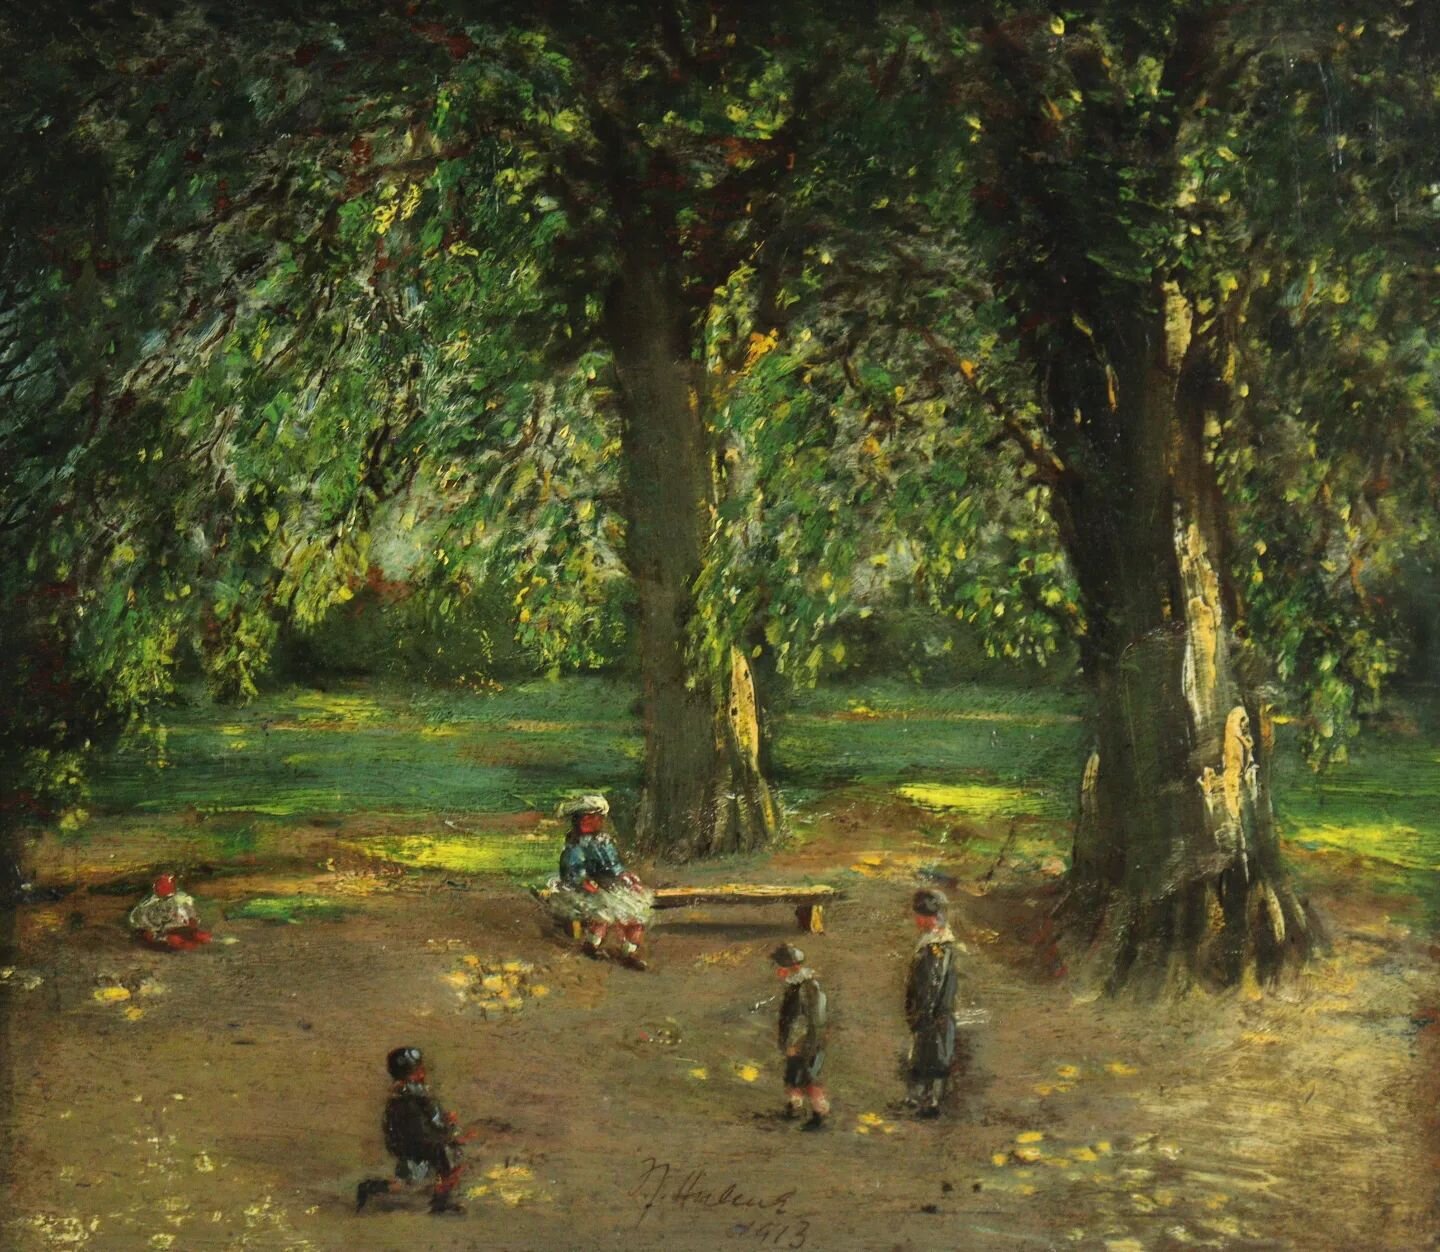 .
Queen's Park, Paddington
by Frederick J Hulme, 1913
Oil on panel

Included in our 26th March Fine Art &amp; Antiques Sale

Catalogue online next week

.

.

.

.

.

.

.

.

#fineart #landscape #london #paddington #queenspark #queensparklondon #br